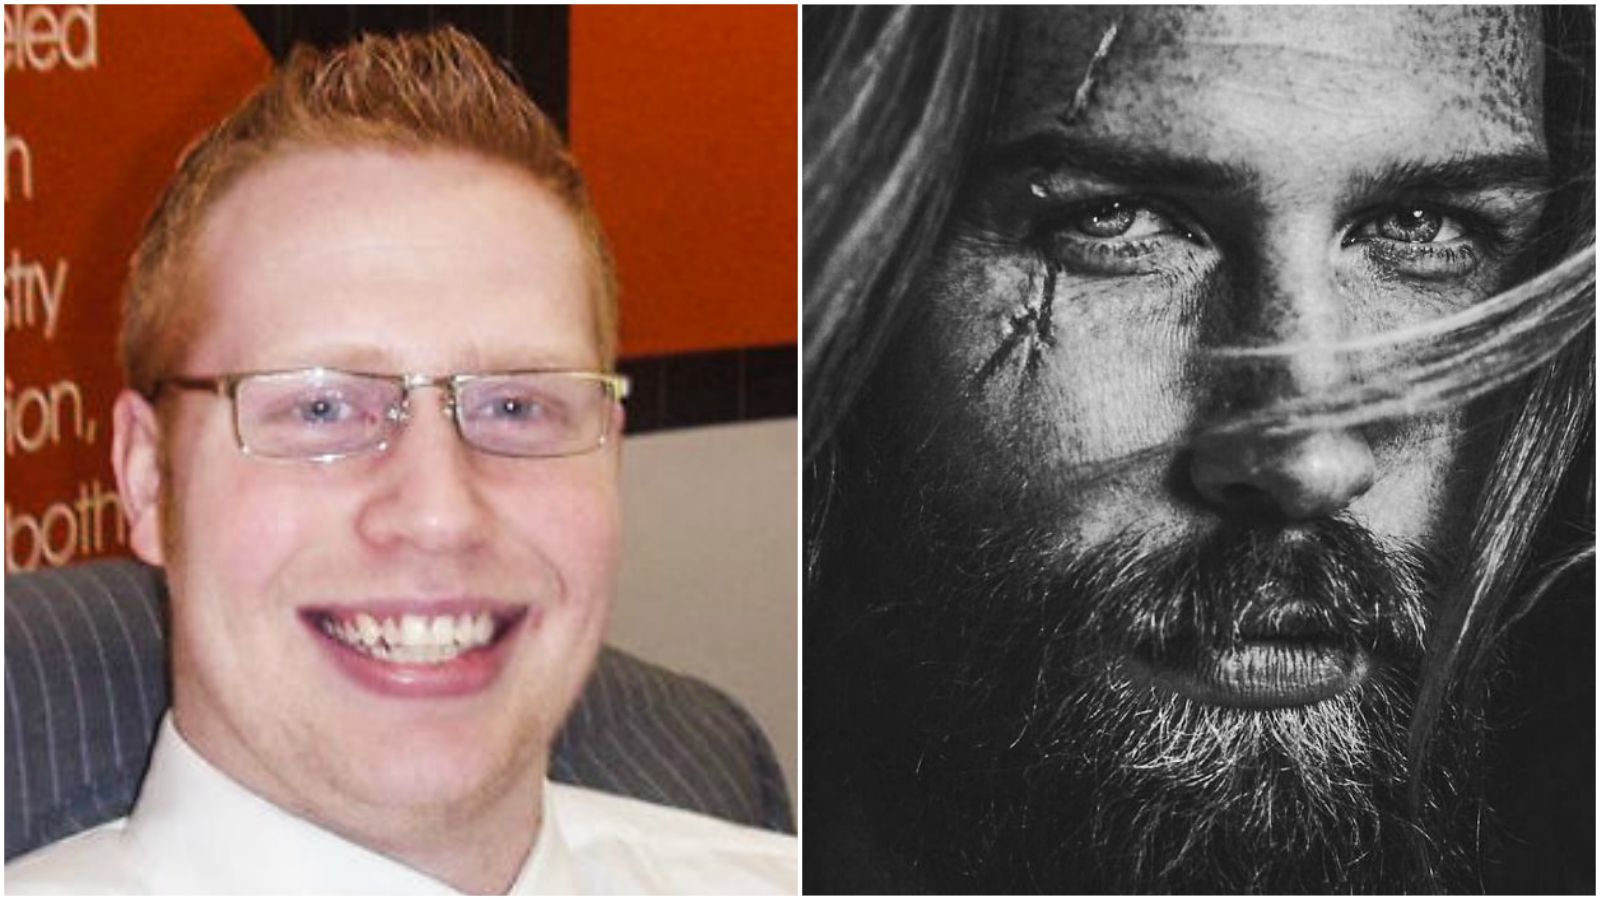 Barber Tells Him to Grow a Beard and It Ends up Transforming His Life